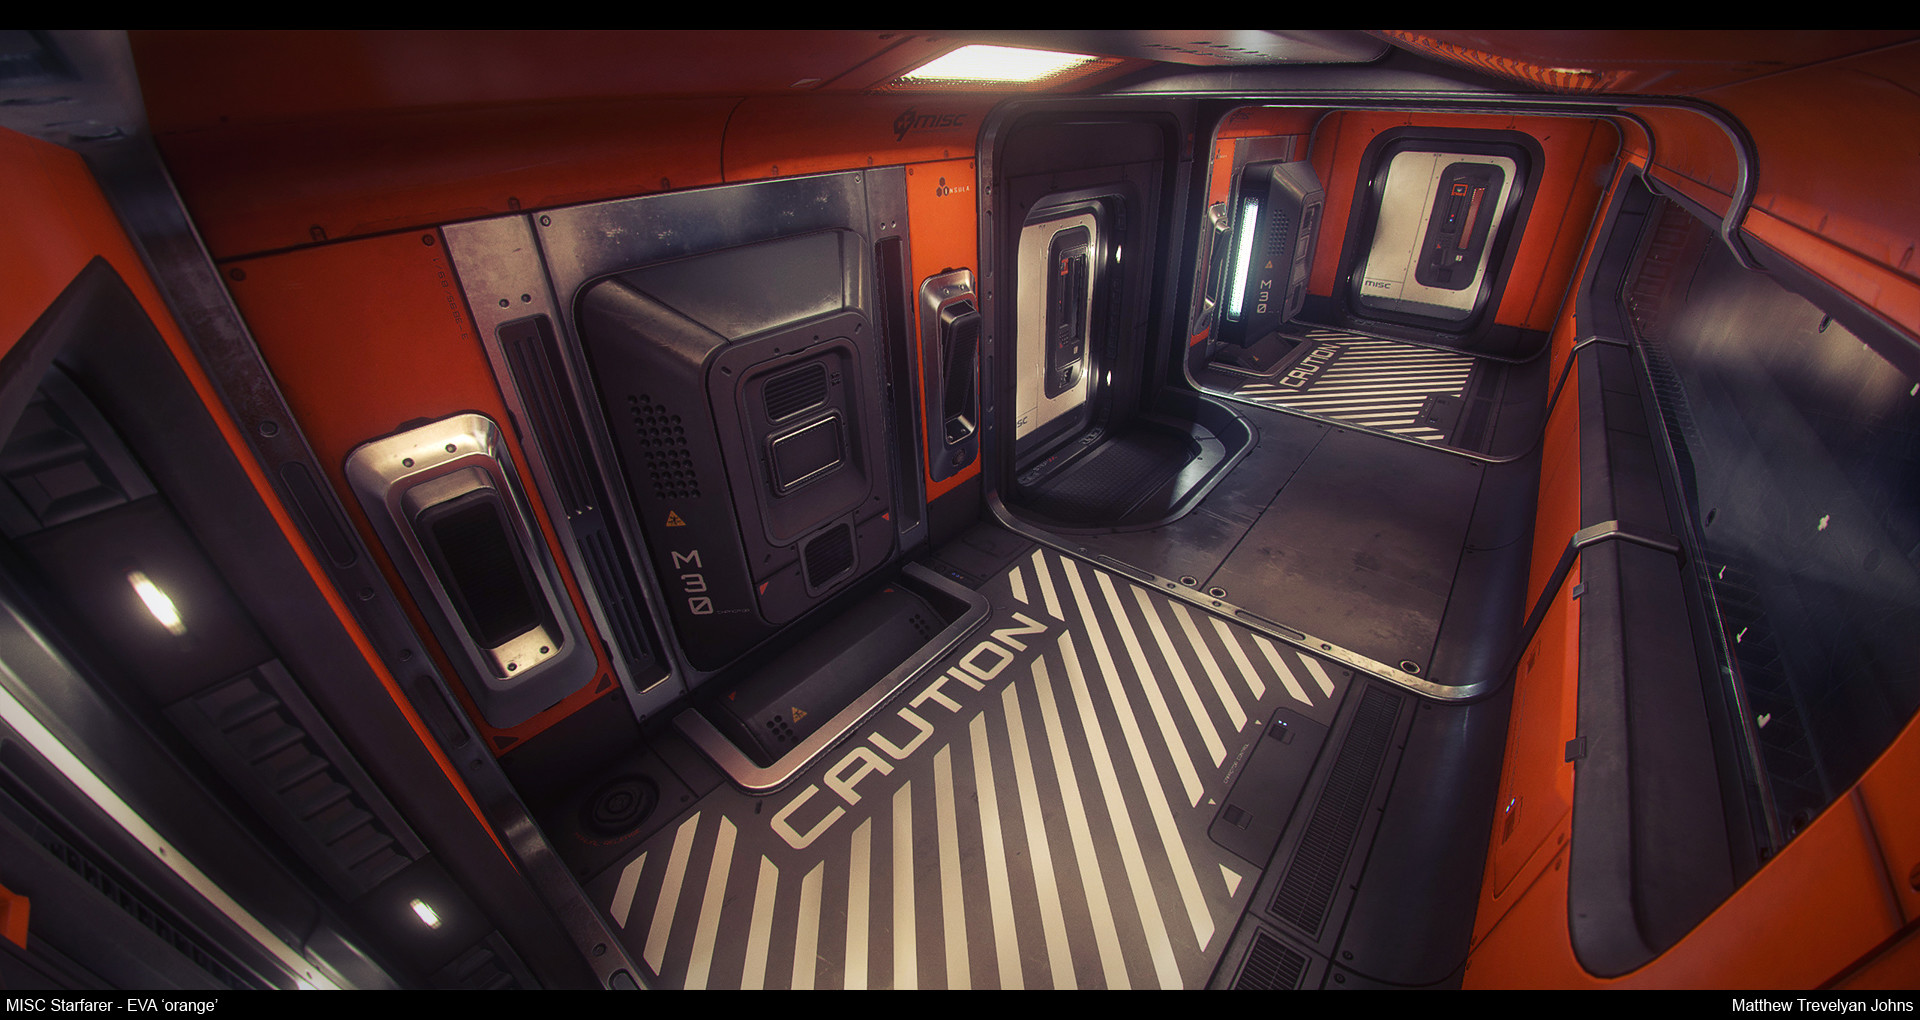 Ue4 Star Citizen The Starfarer Airlock Area Finished Polycount Images, Photos, Reviews